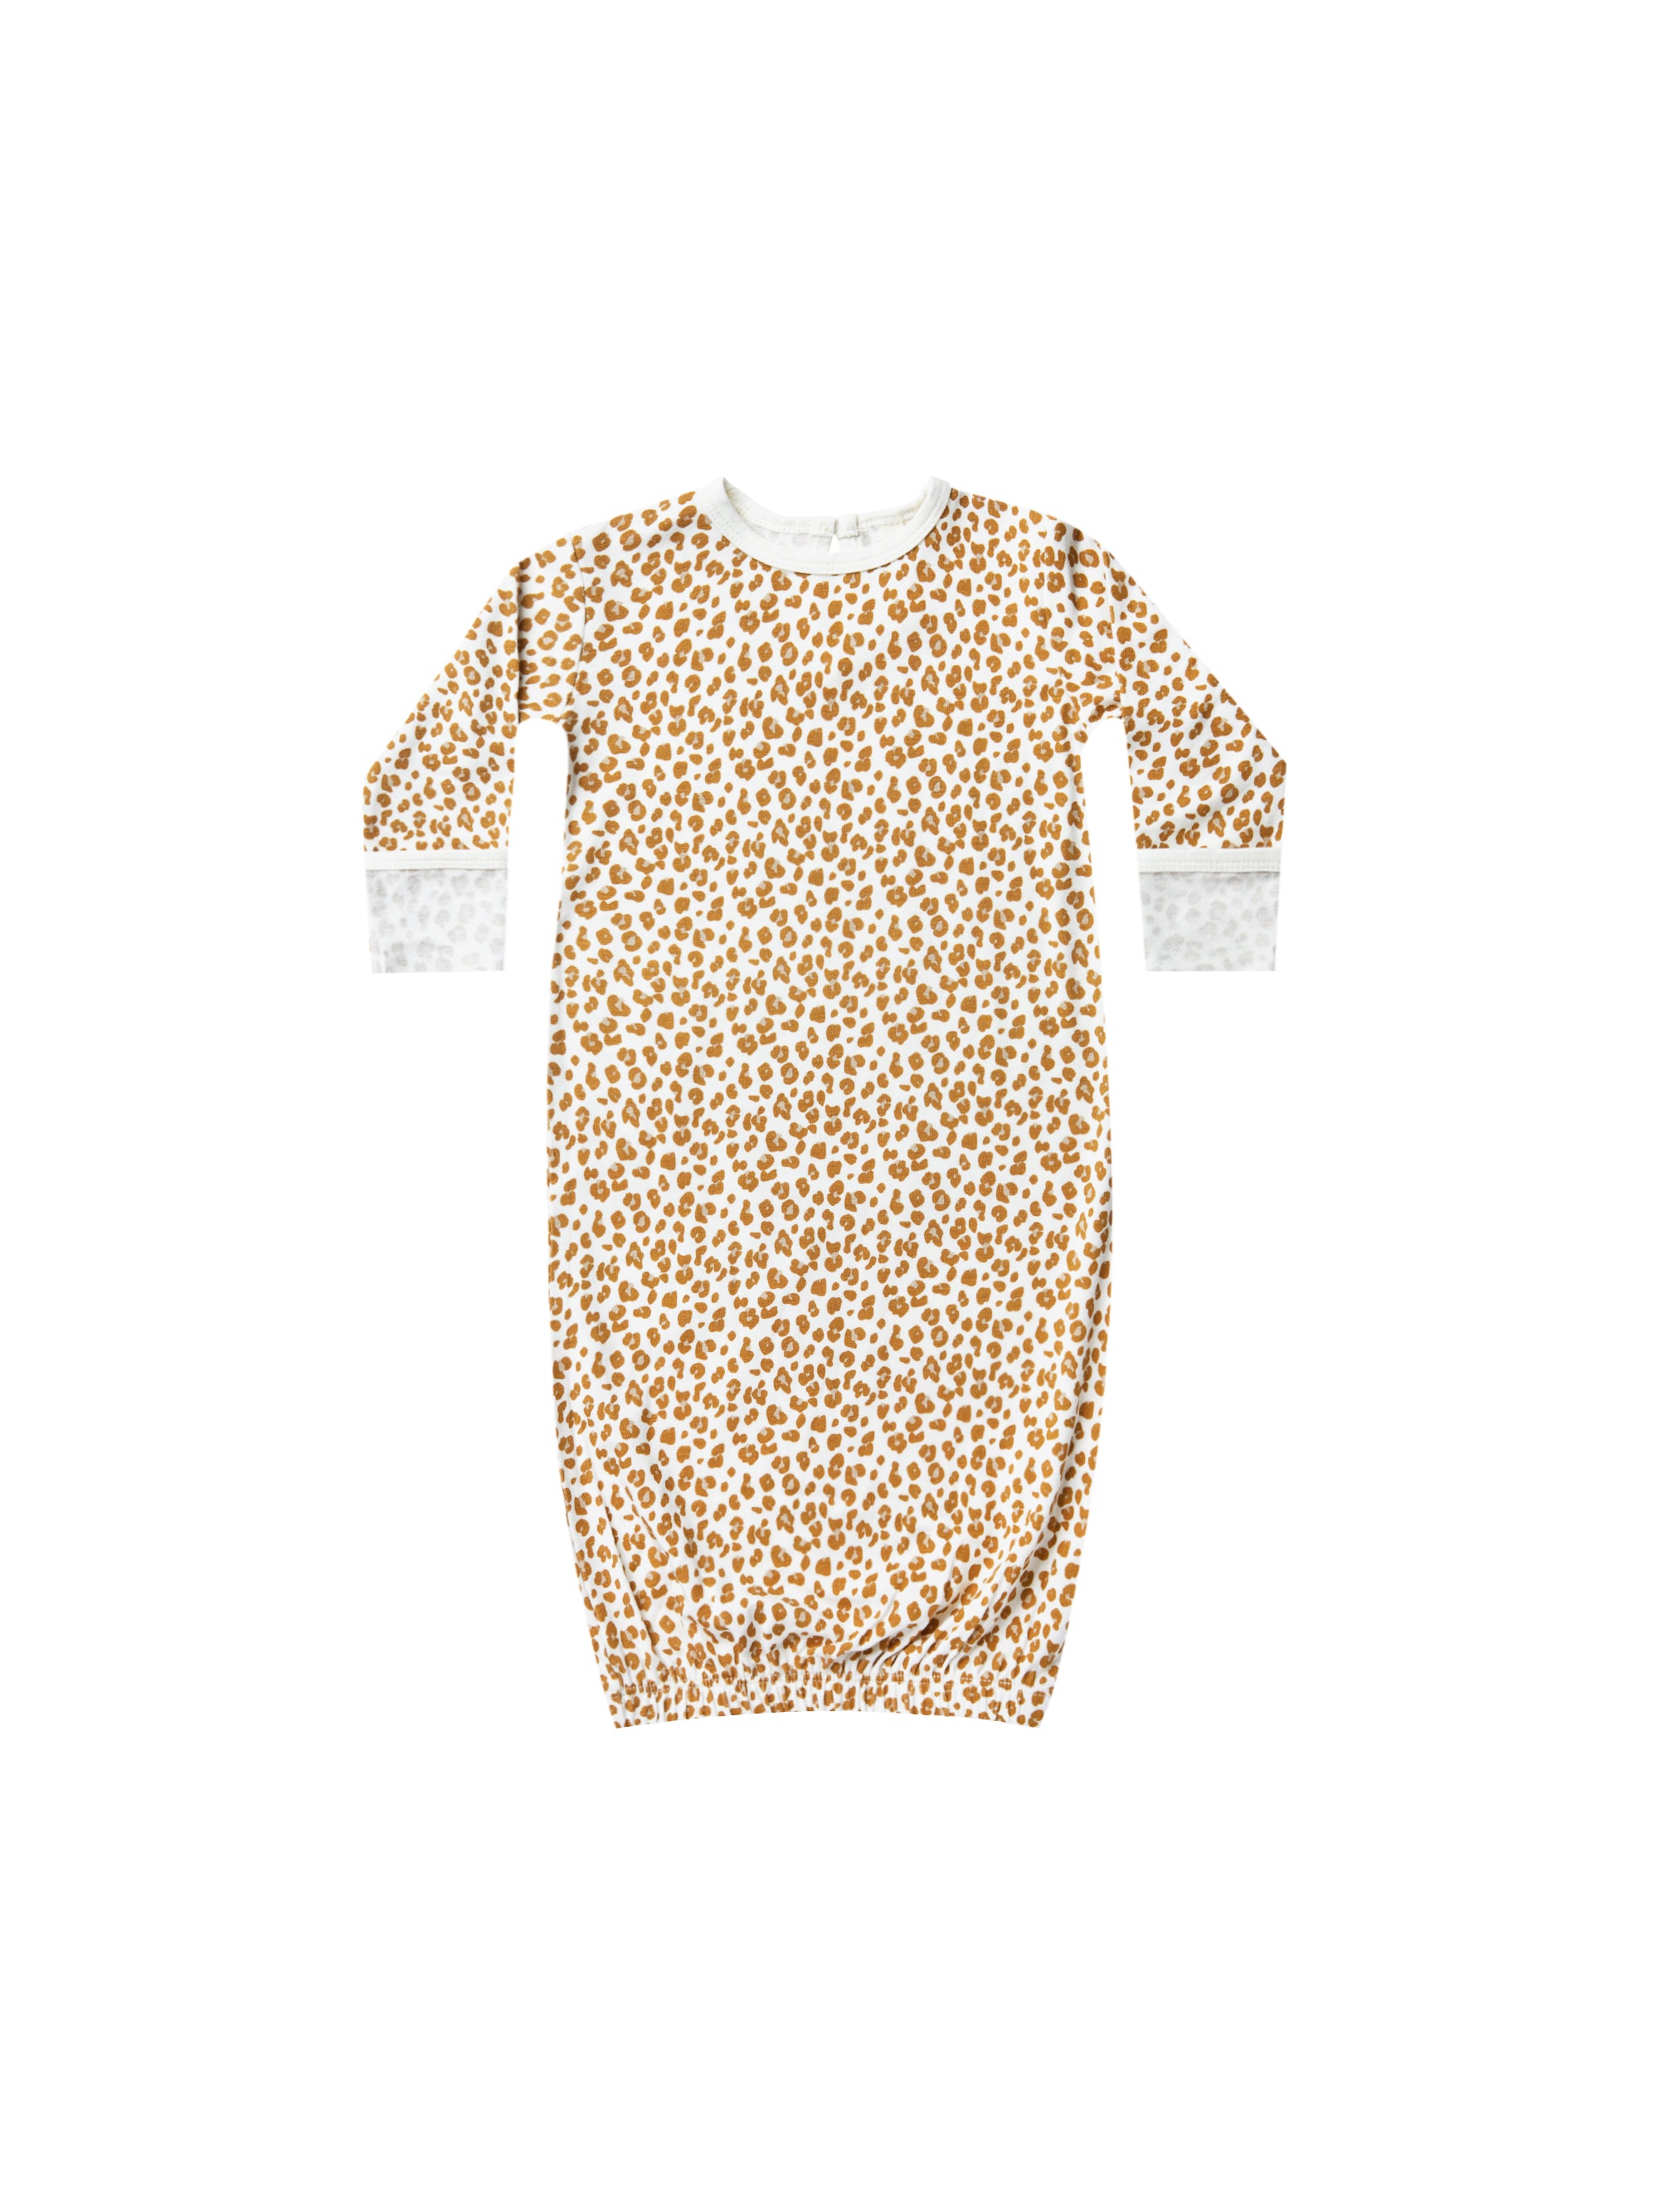 QUINCY MAE BAMBOO BABY GOWN / CHEETAH